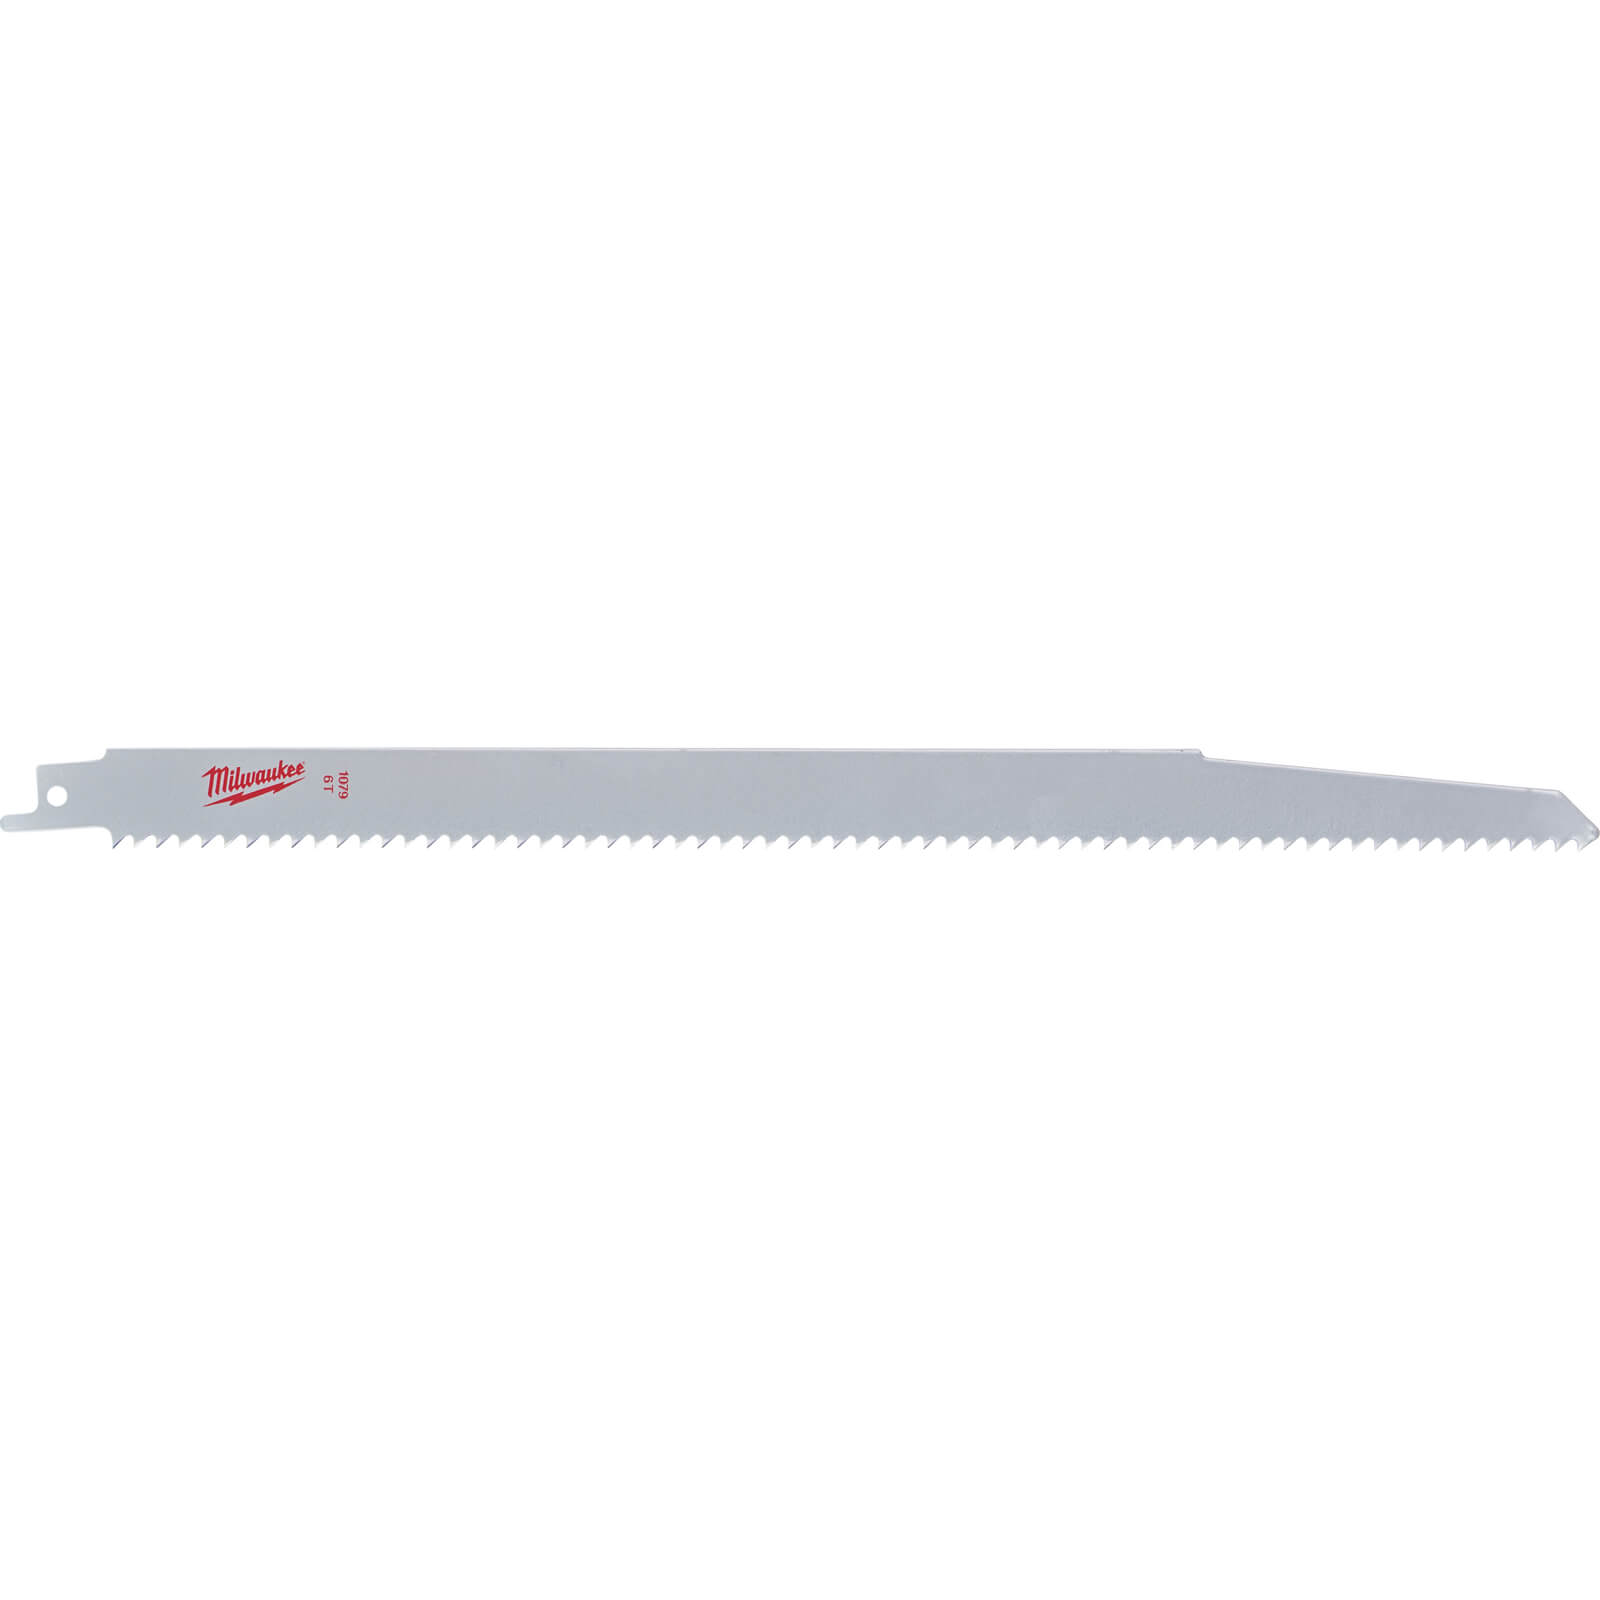 Image of Milwaukee S1433D Wood and Plastic Saw Blades 300mm Pack of 3